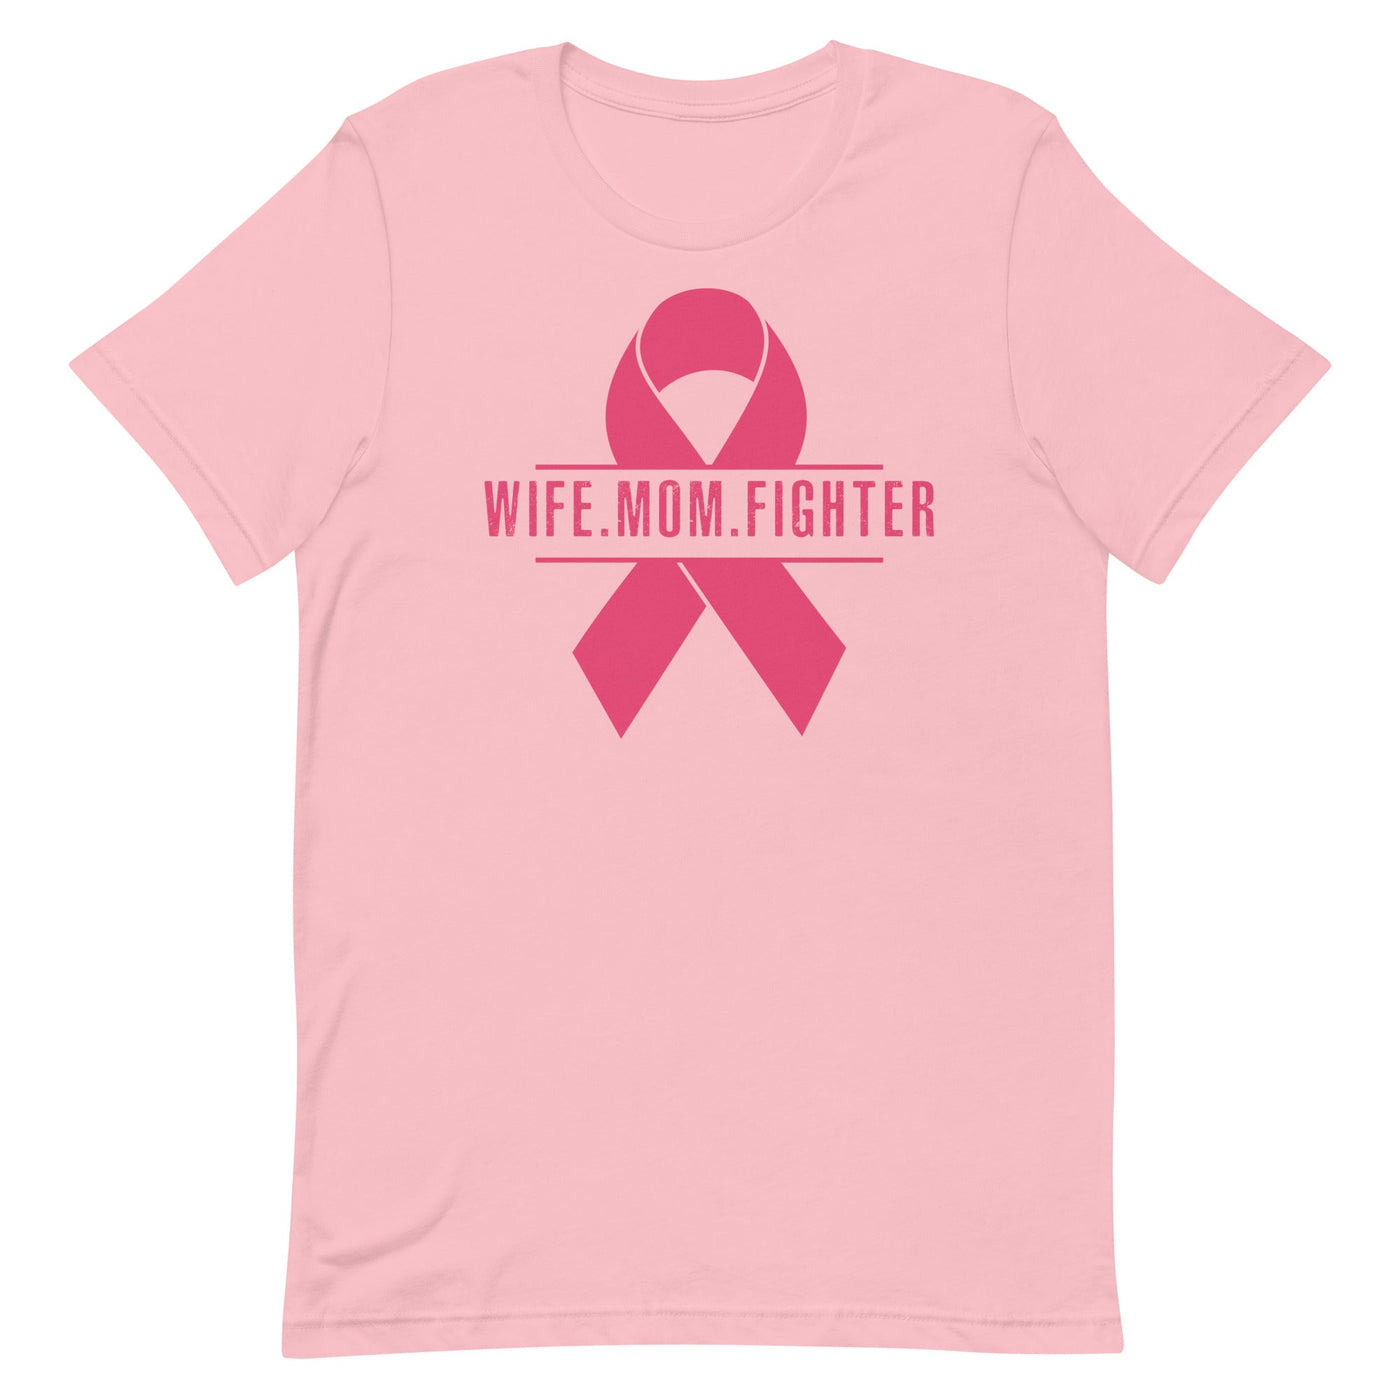 WIFE. MOM. FIGHTER WOMEN'S T-SHIRT- PINK FONT Pink S 